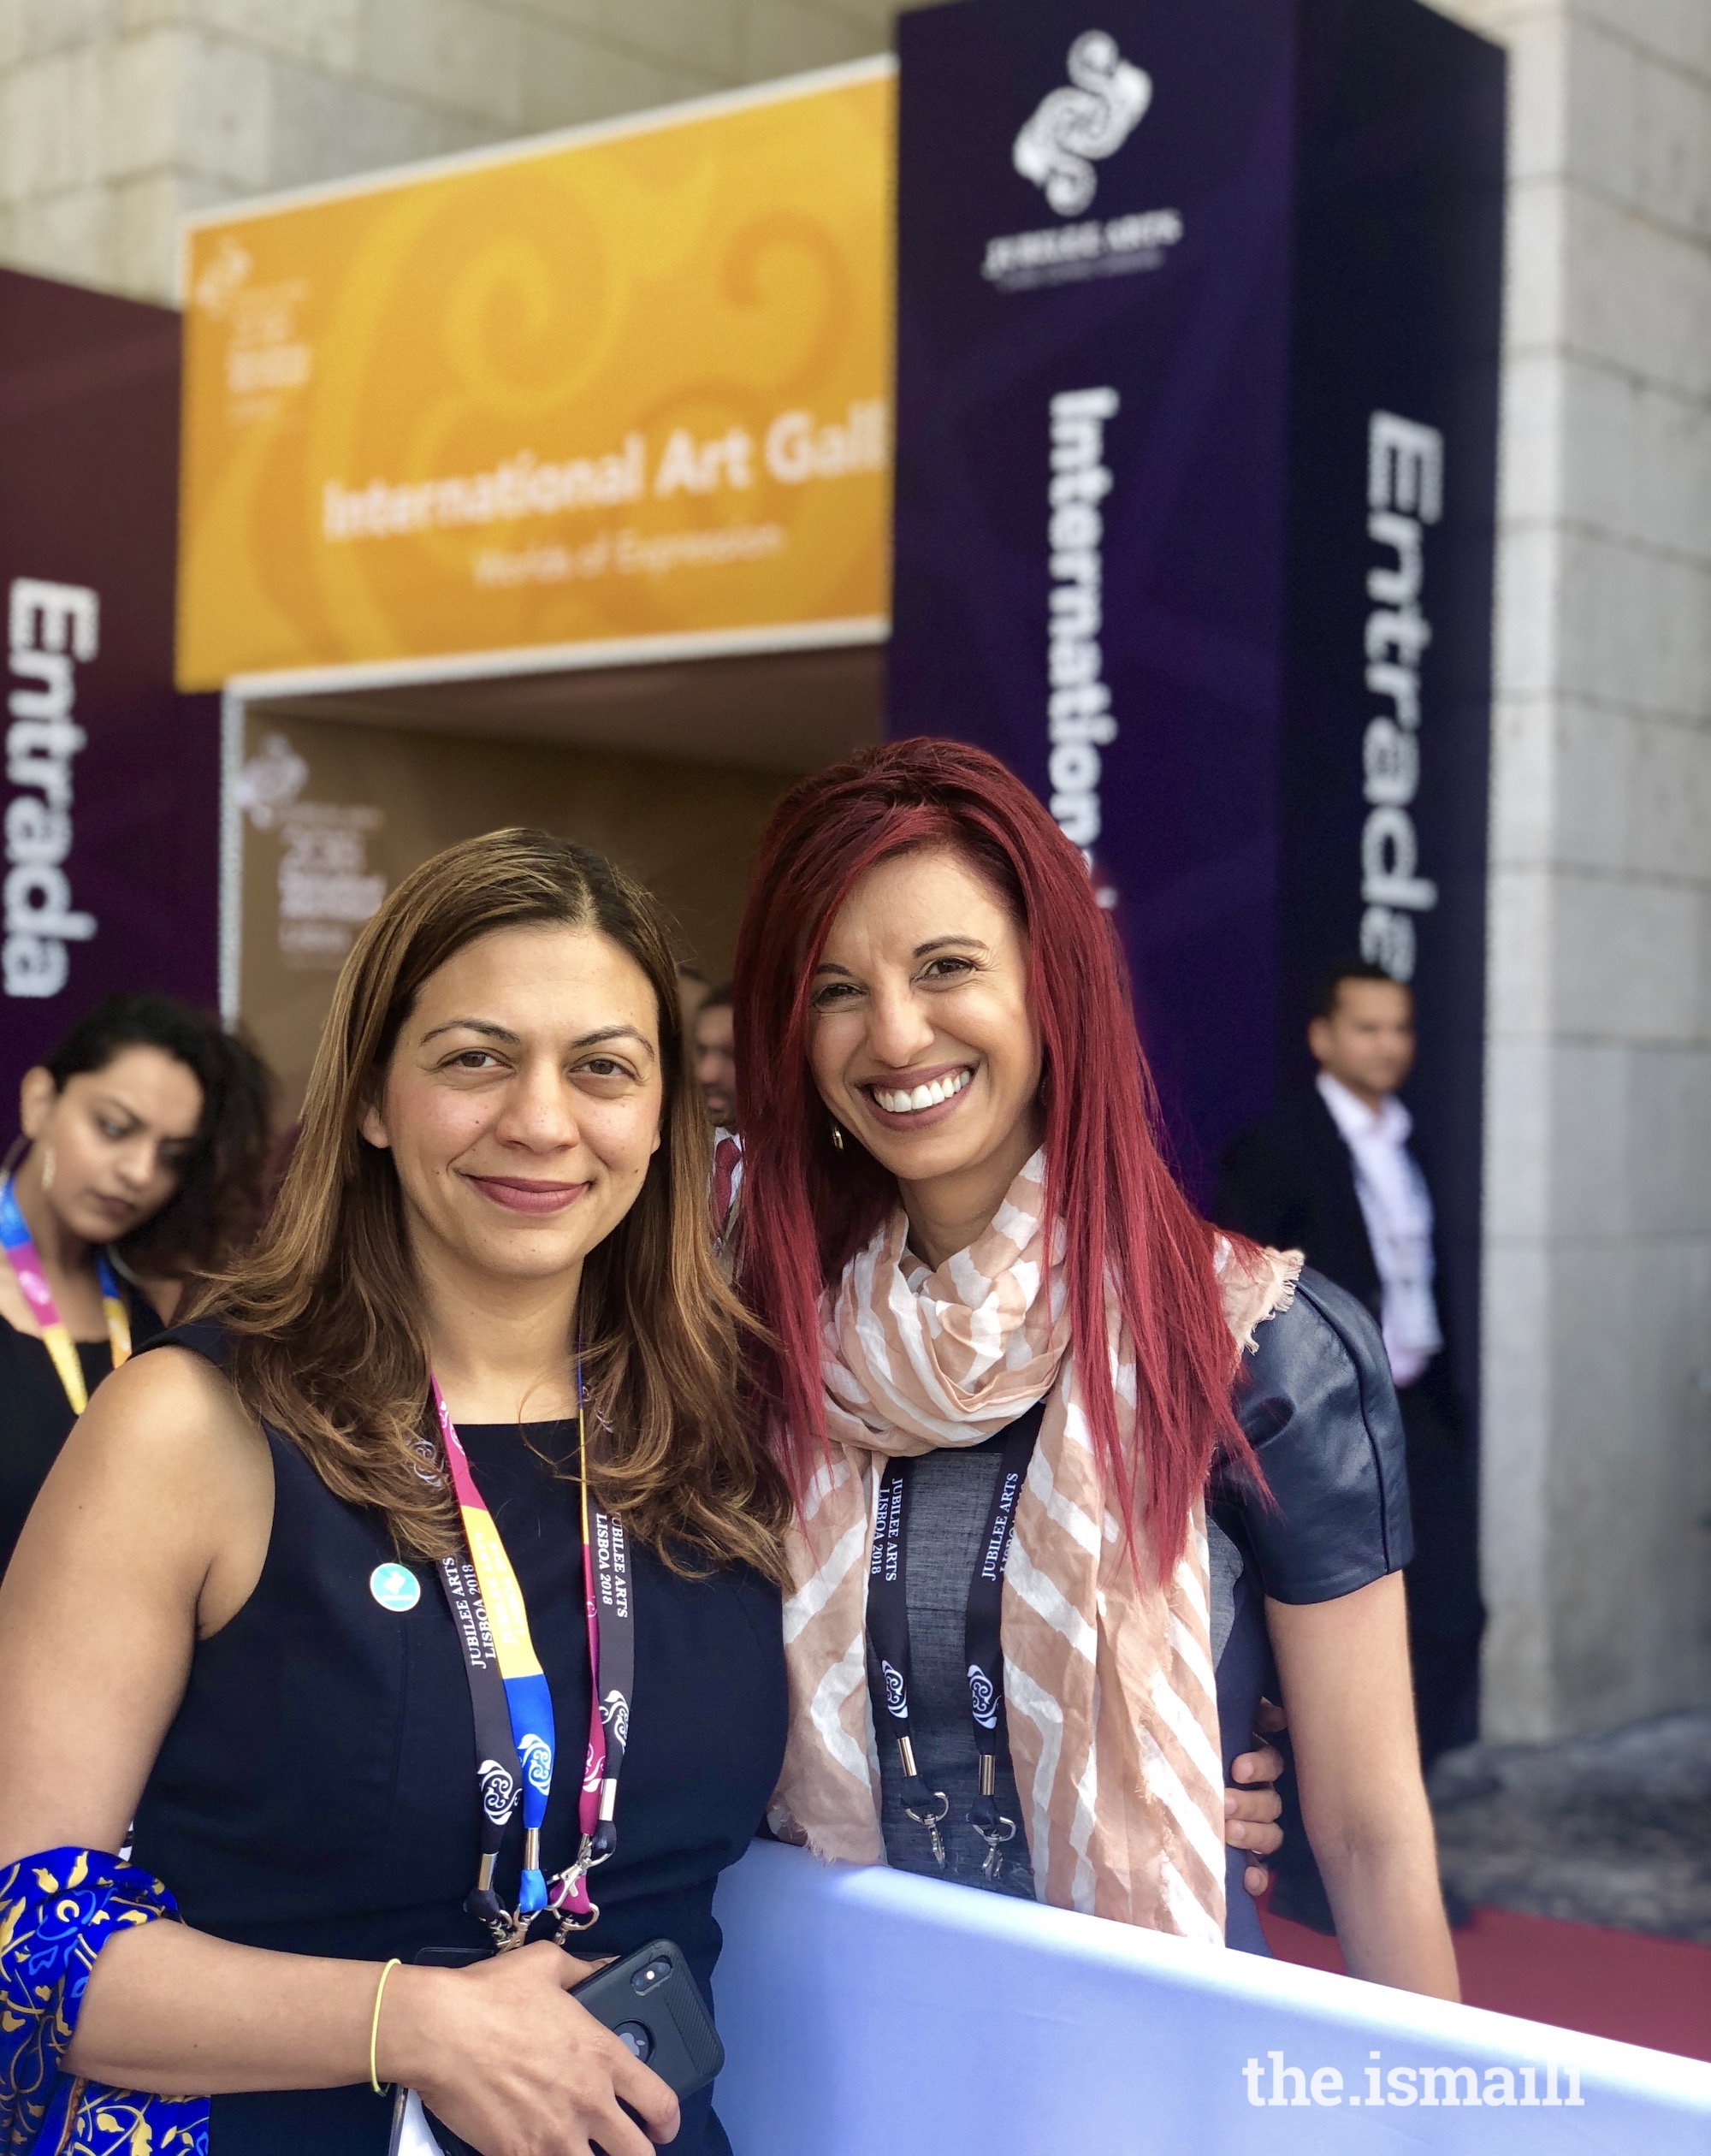 Jenny and Nabila pictured at the Jubilee Arts International Arts festival in Lisbon in July 2018.